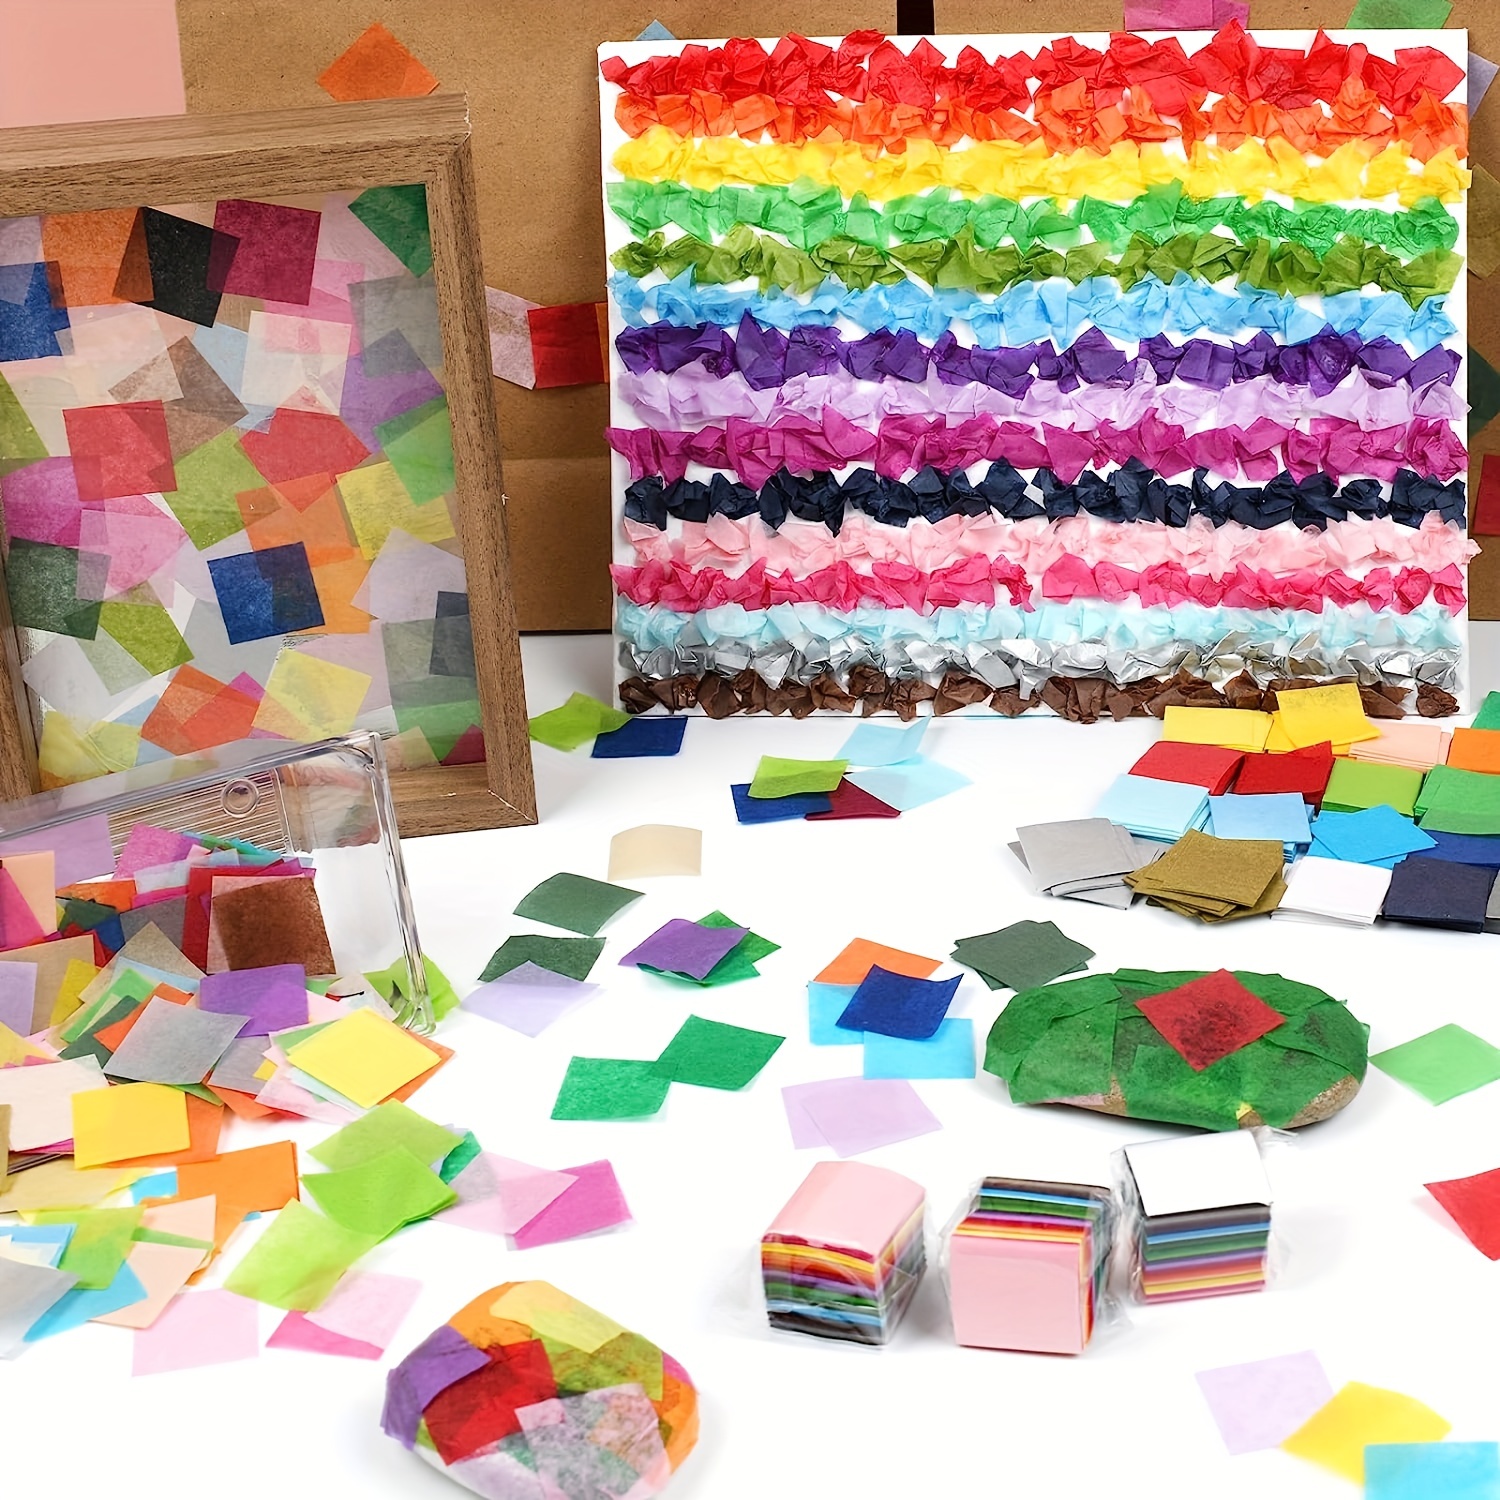 1.5 Tissue Paper Squares for Crafting in Assorted Colors - Pack of 2,000